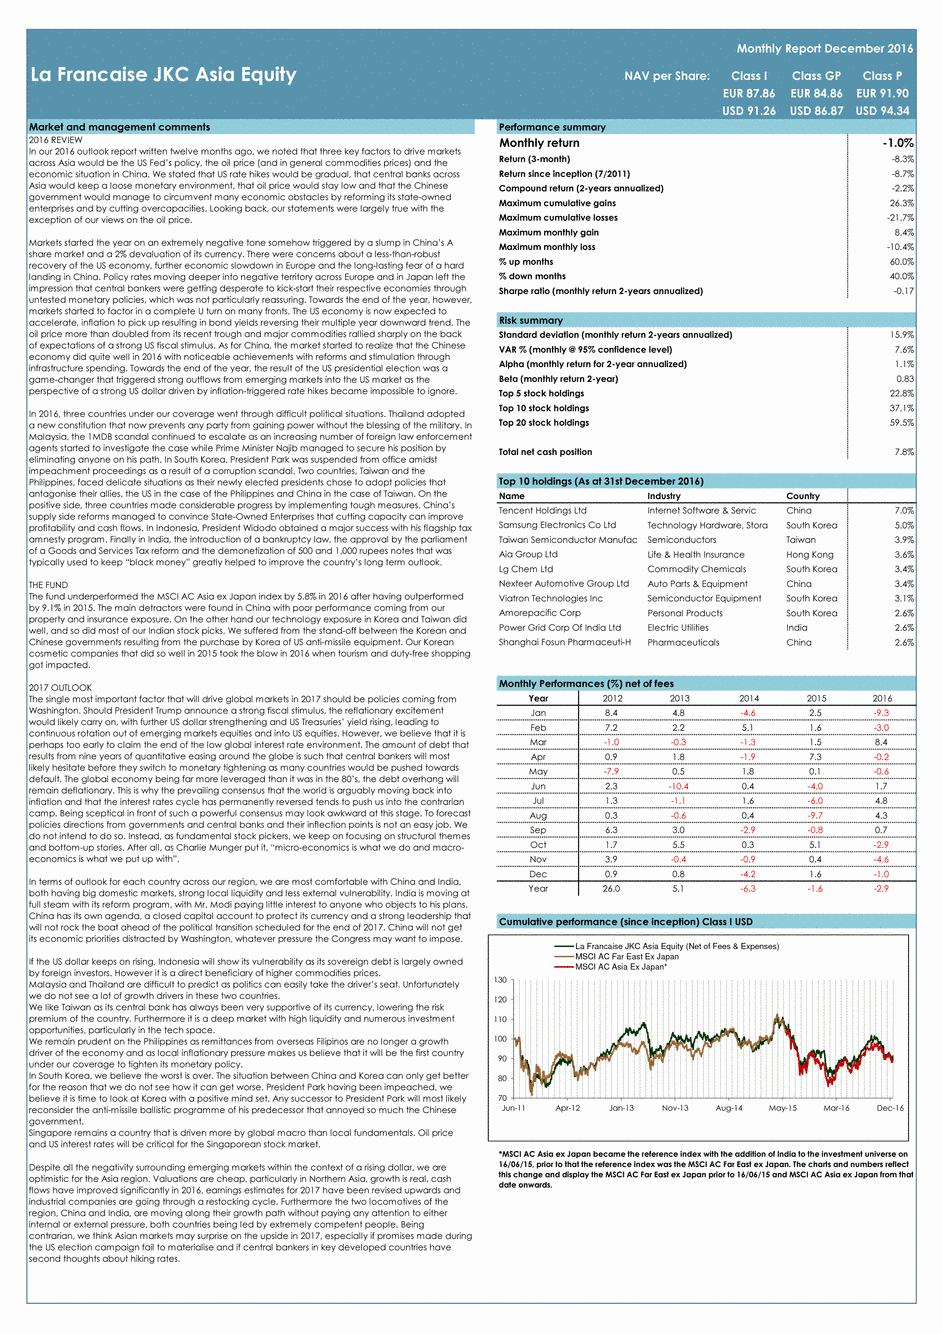 Reporting JKC Fund - La Française JKC Asia Equity (Classe P EUR-HEDGED) - 31/12/2016 - English